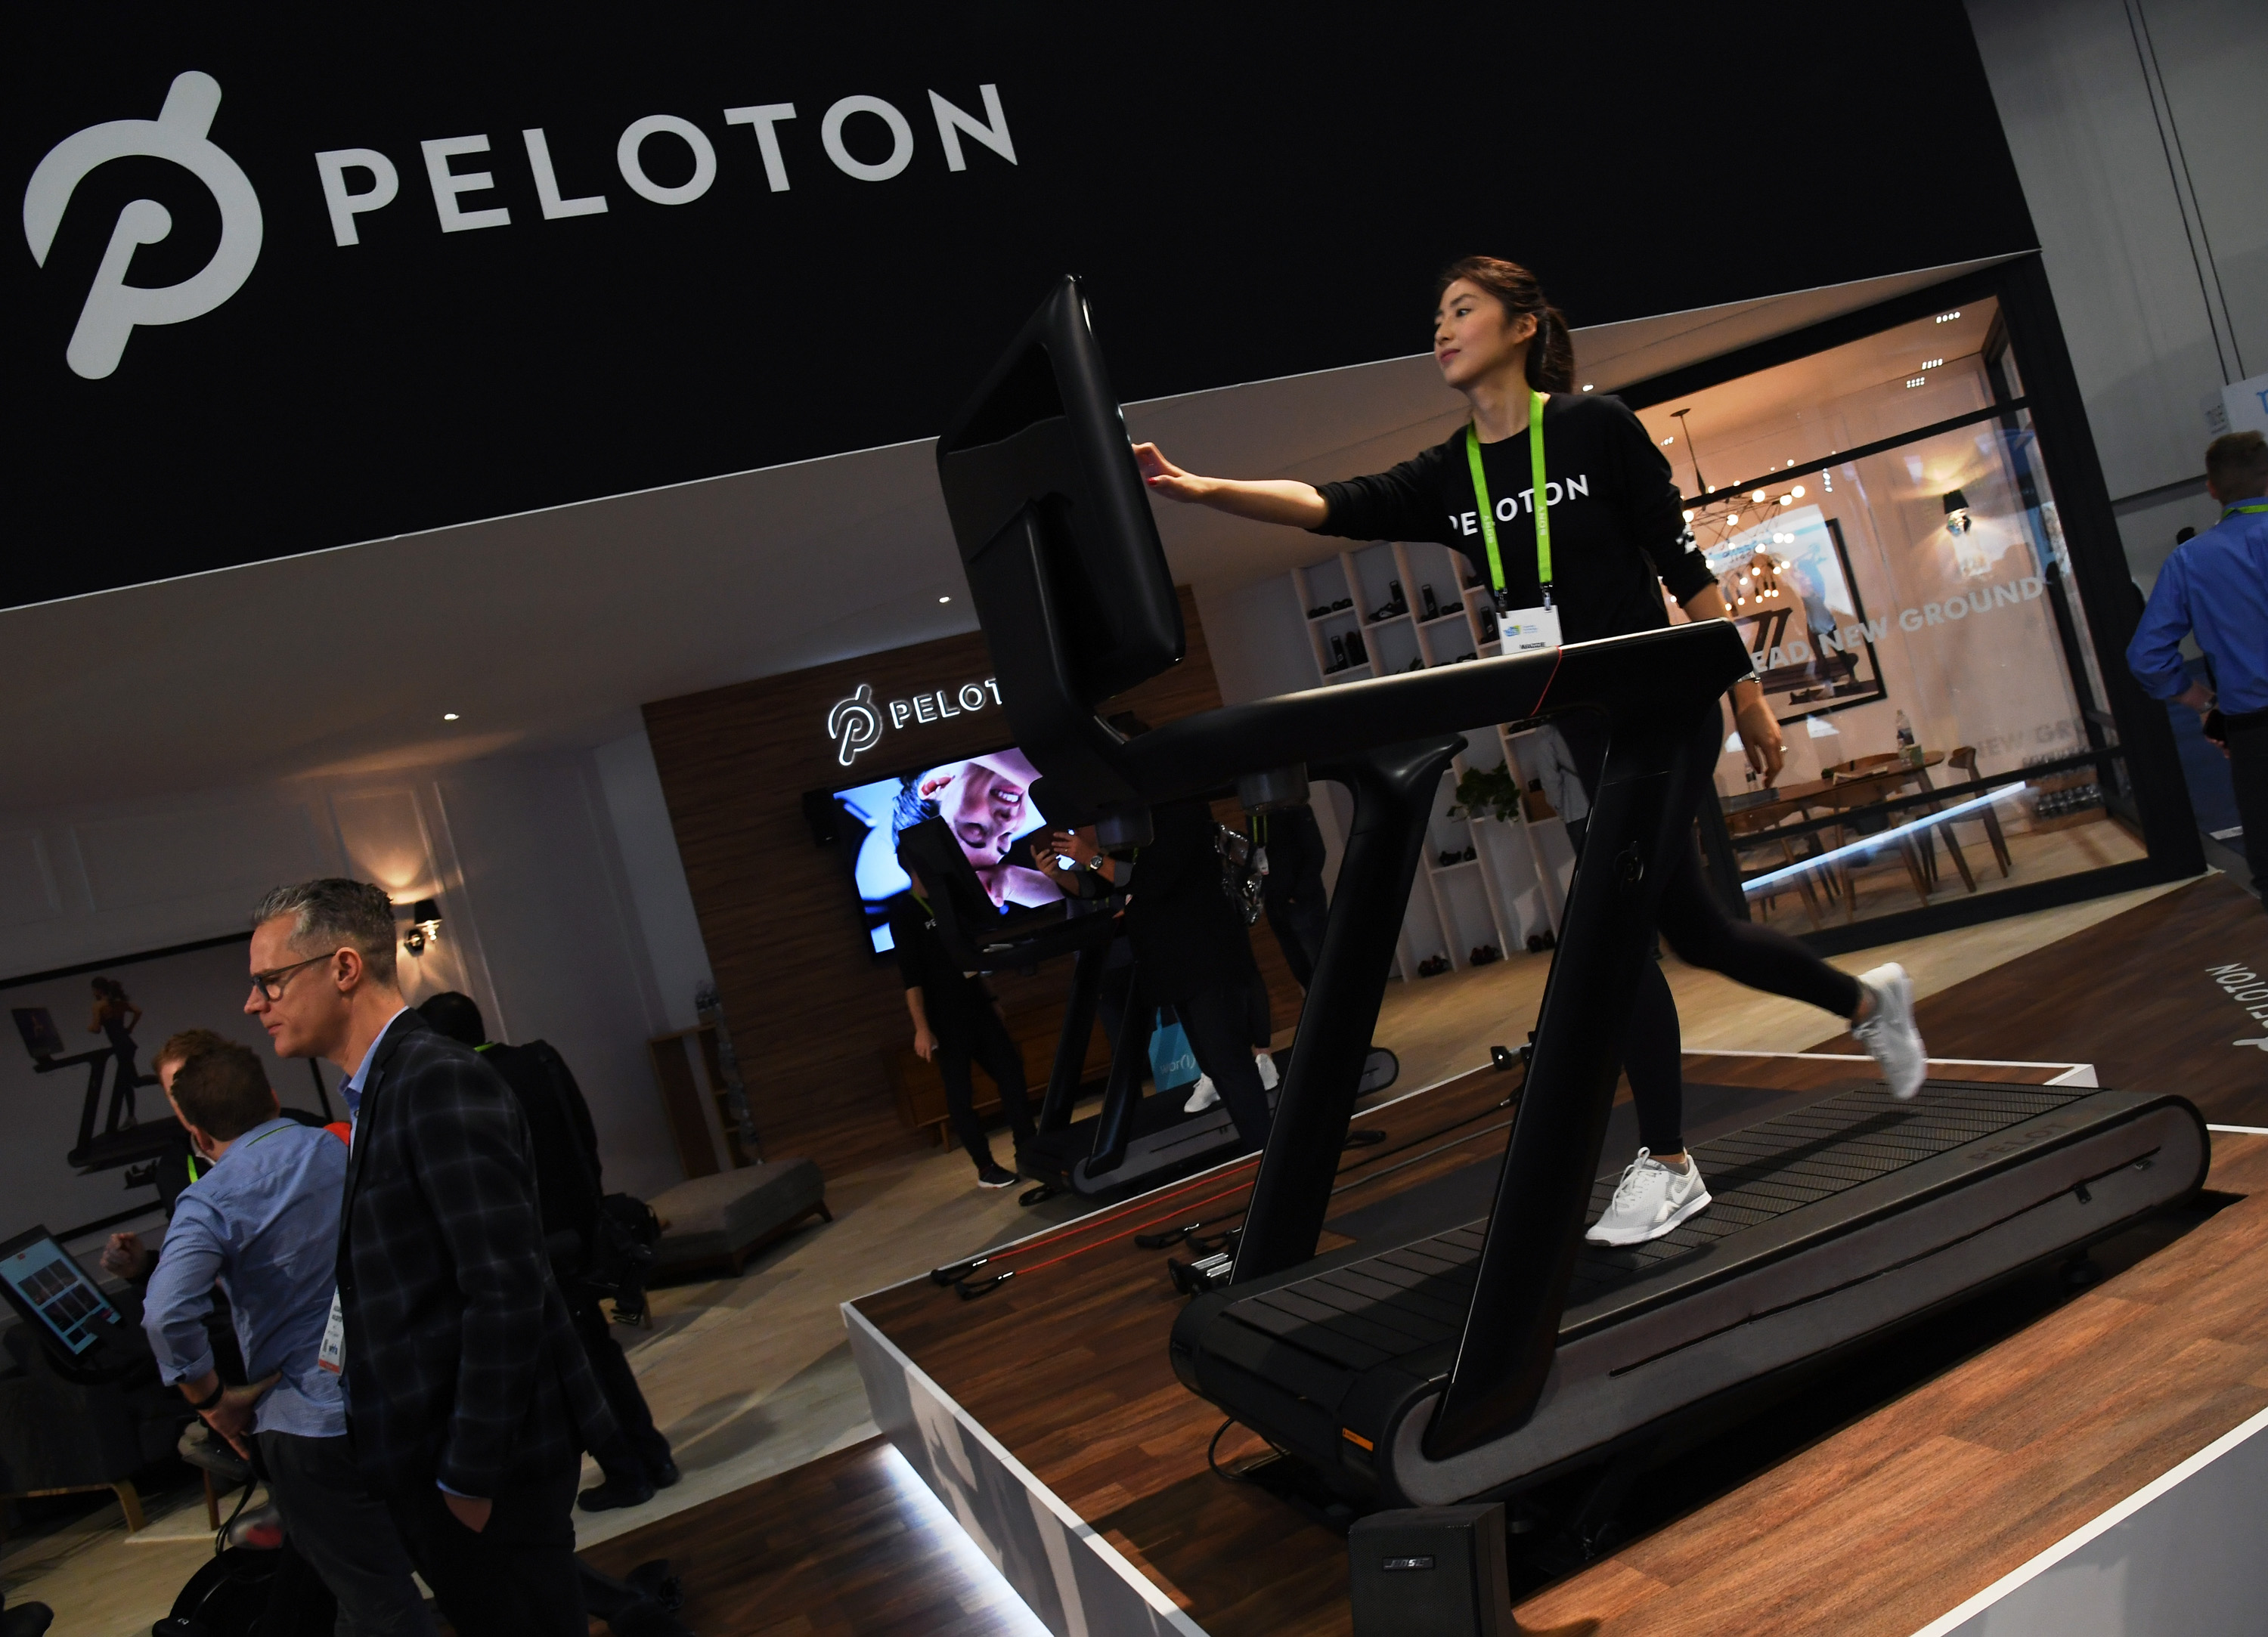 Peloton says it's facing federal investigations over equipment safety